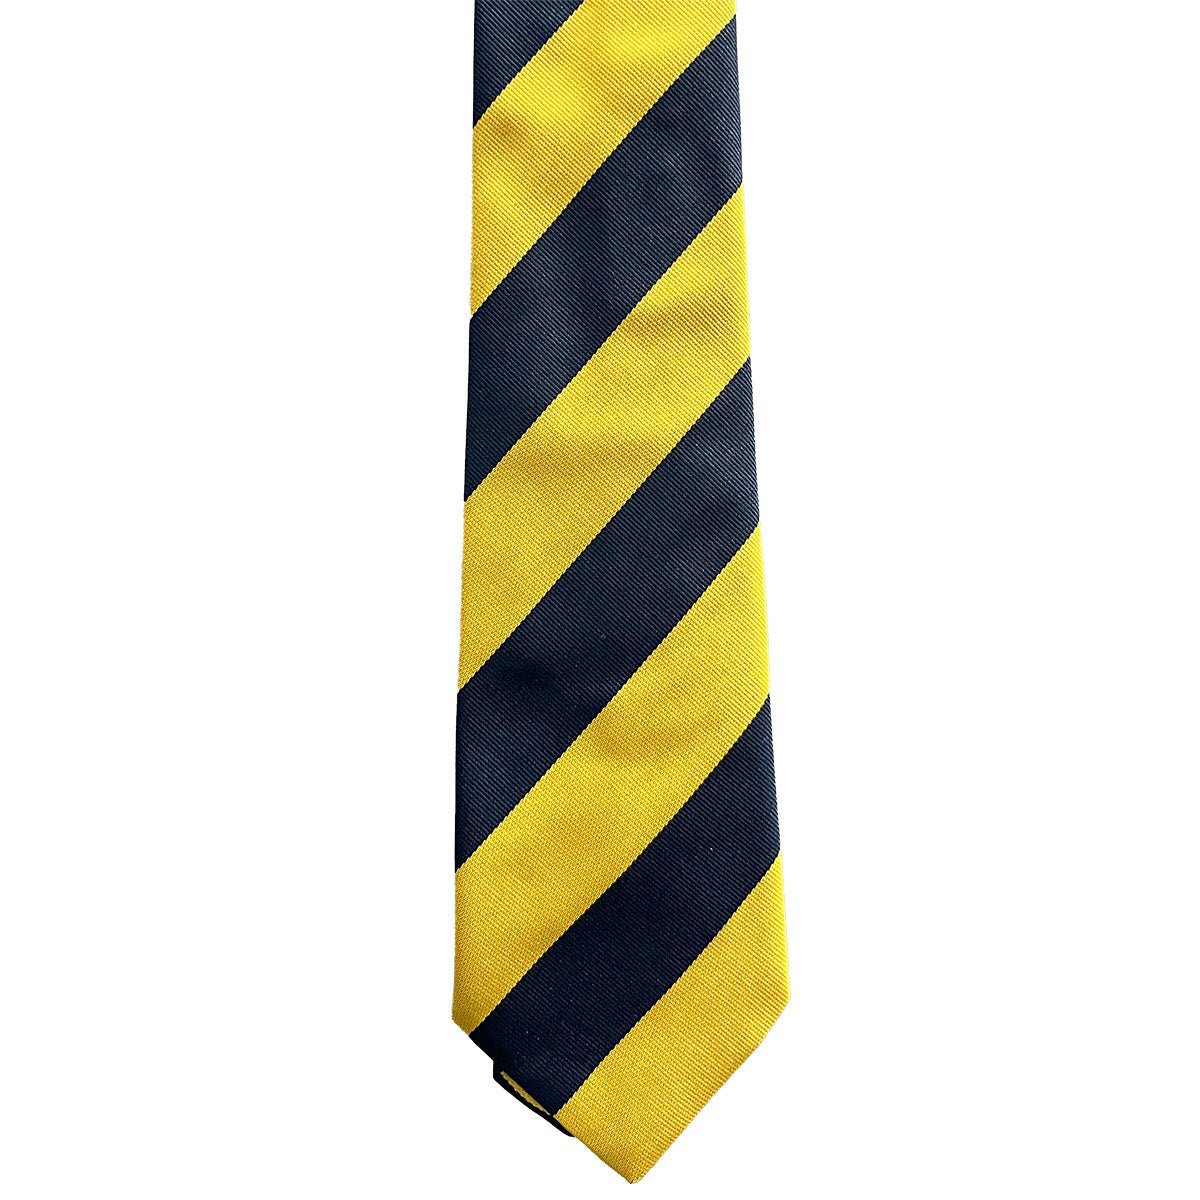 Princess of Wales Royal Regiment PWRR Polyester Tie - John Bull Clothing